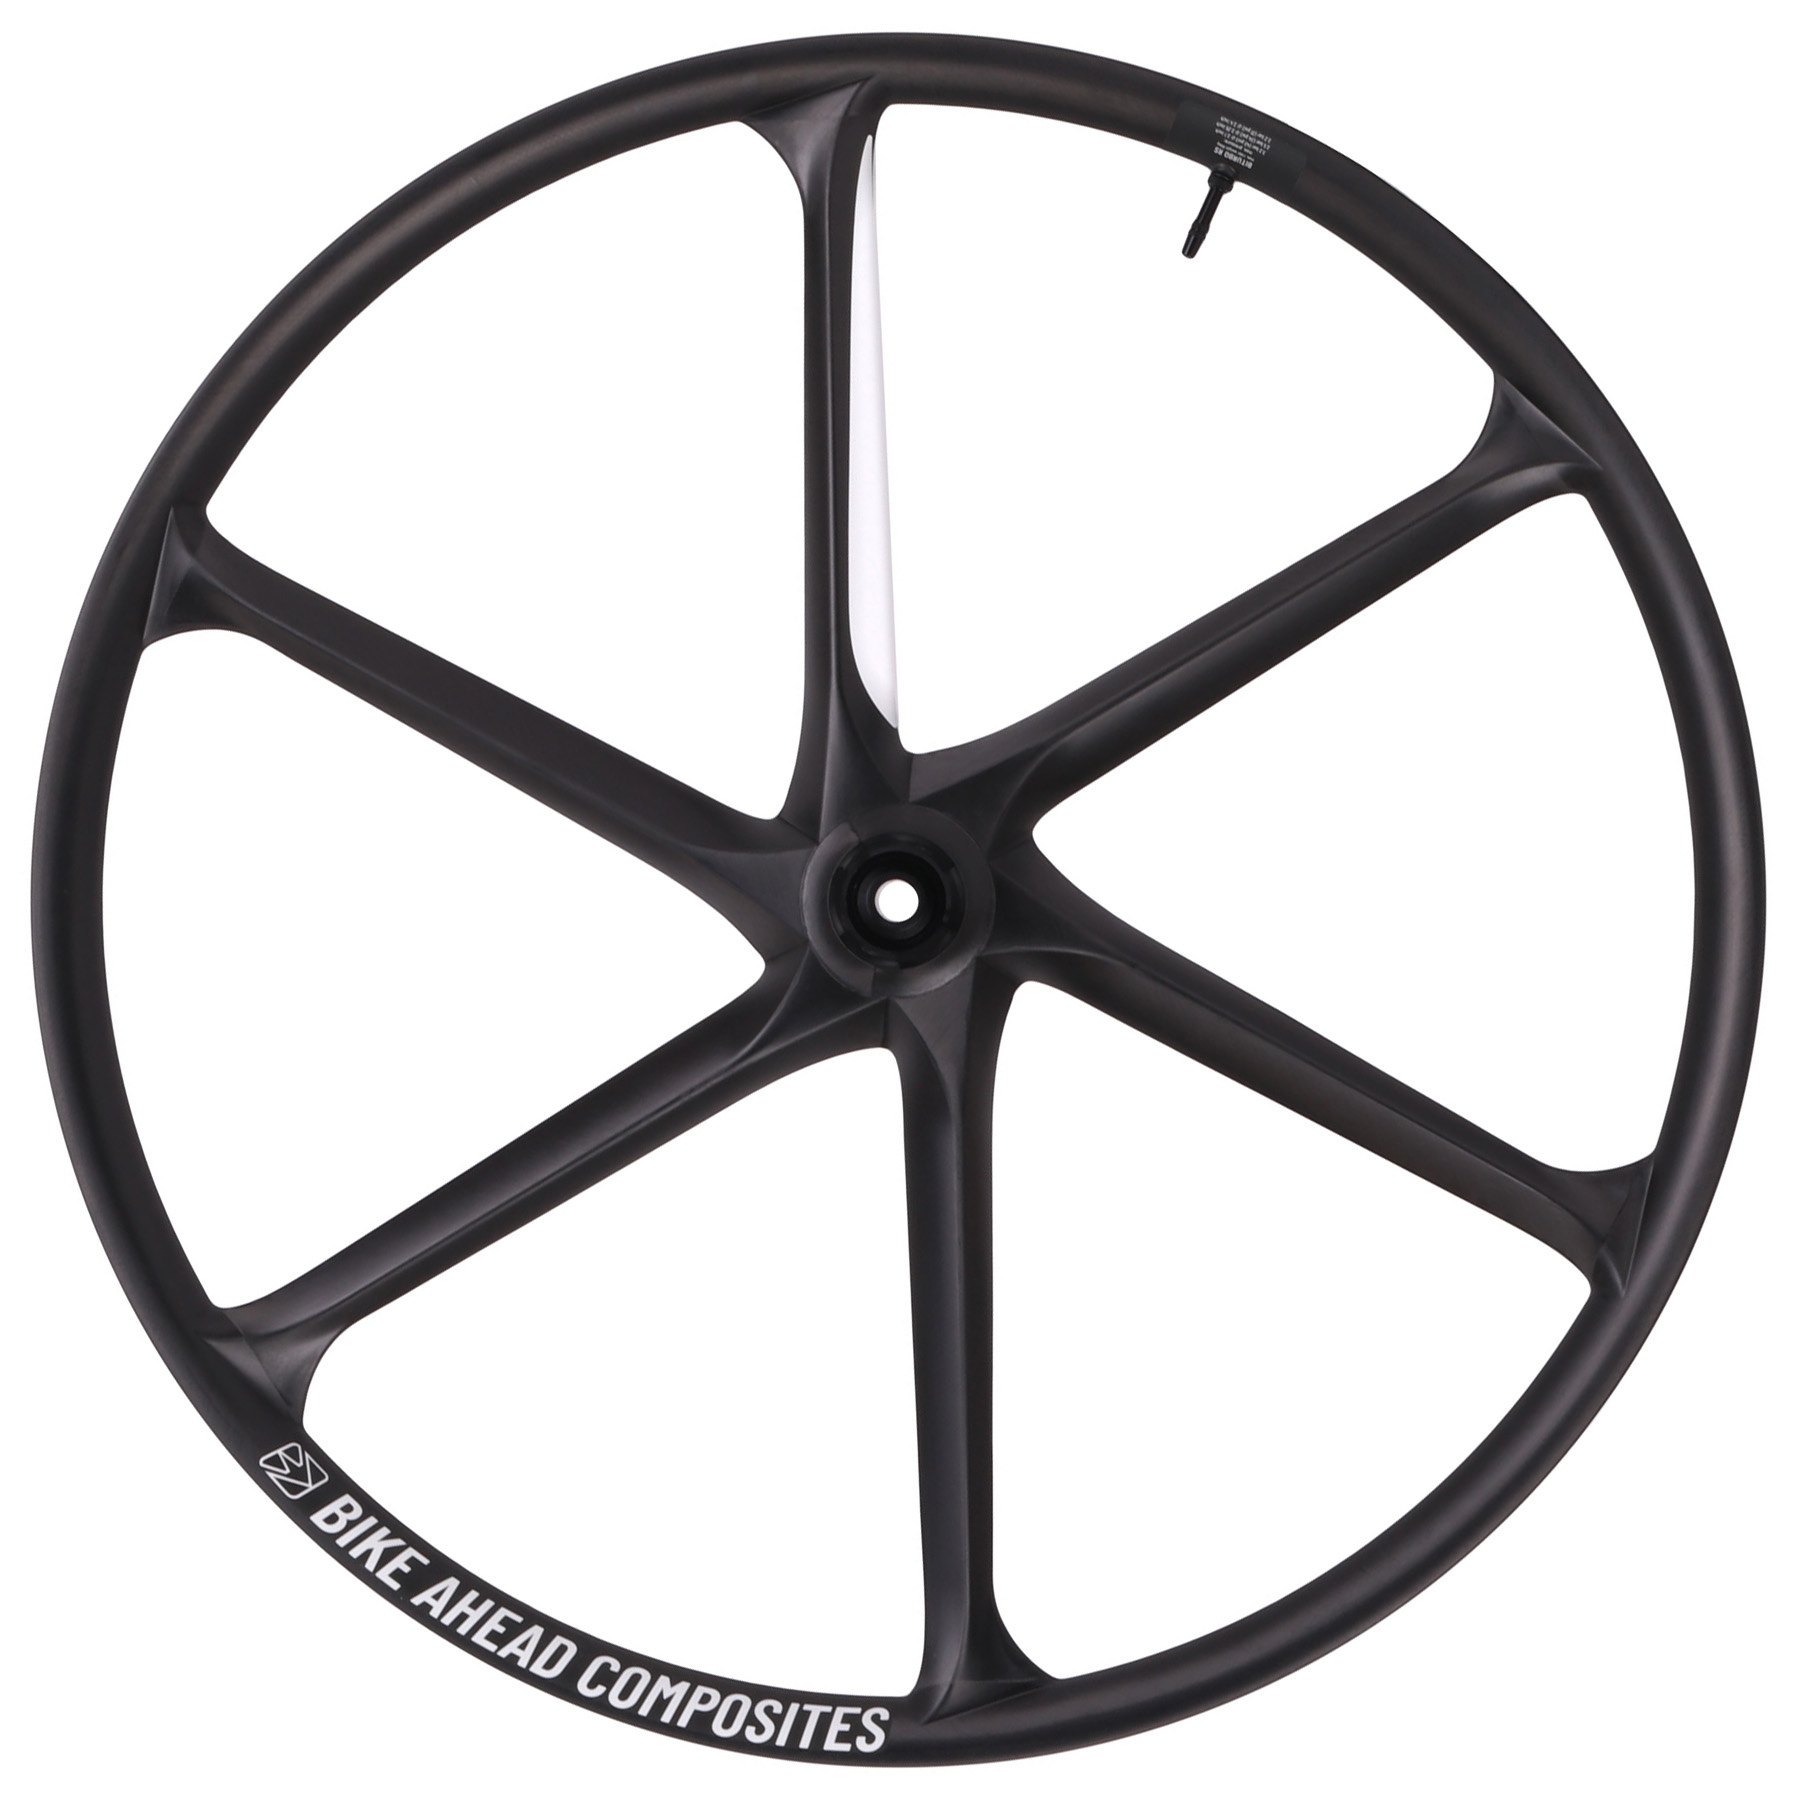 Picture of bike ahead composites BITURBO RS Carbon Front Wheel - 6-Bolt - 15x110mm